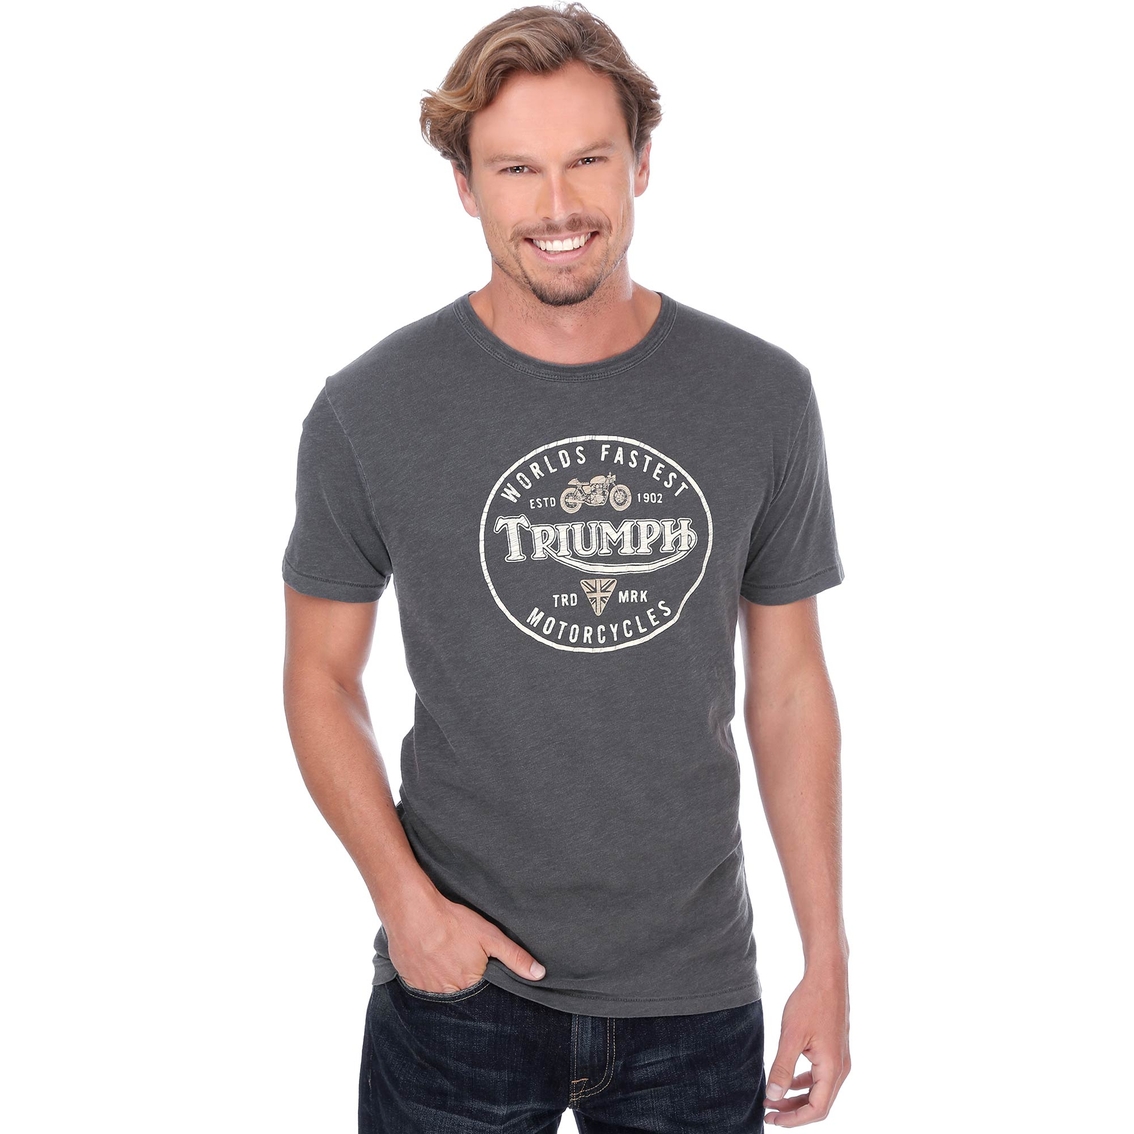 Lucky Brand Triumph Motorcycle Tee | T-shirts | Clothing & Accessories ...